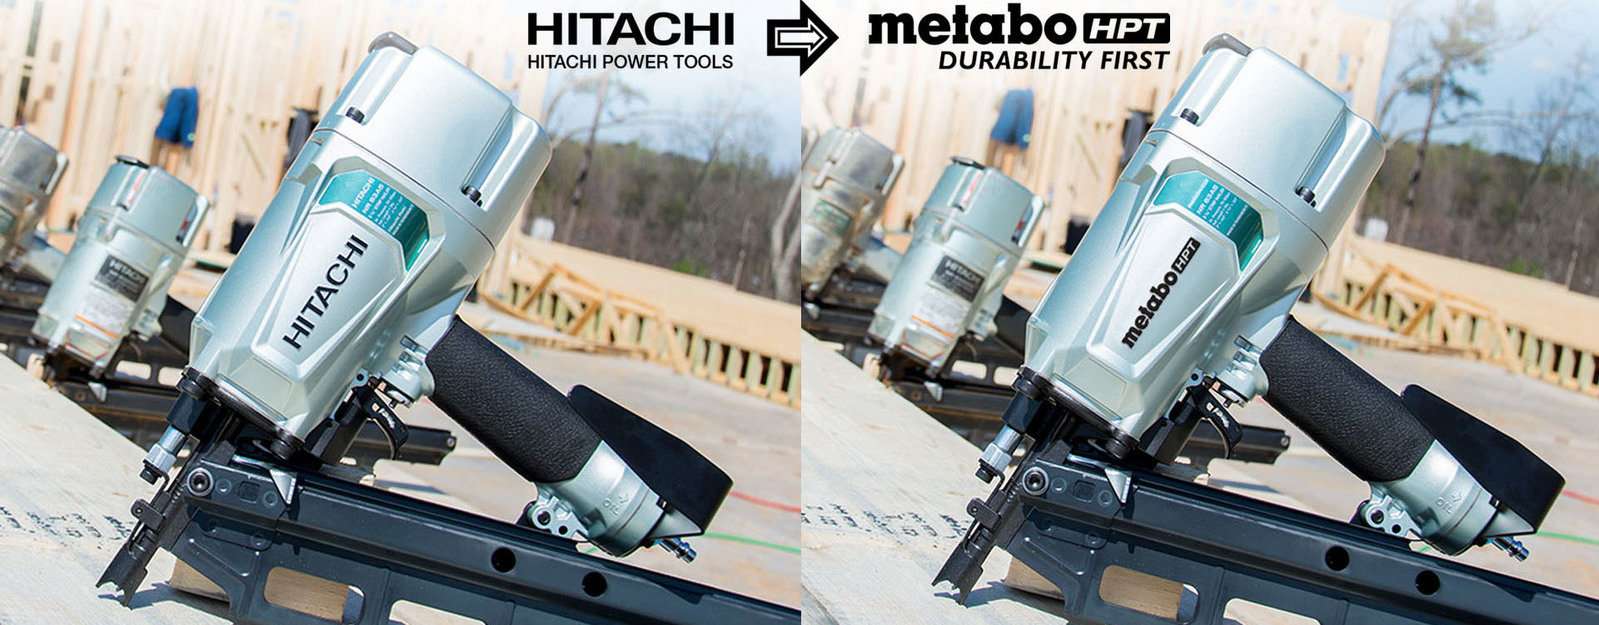 Hitachi Power Tools is Changing Their Name to Metabo—But Metabo's Tools Will Still Be Different - Core77